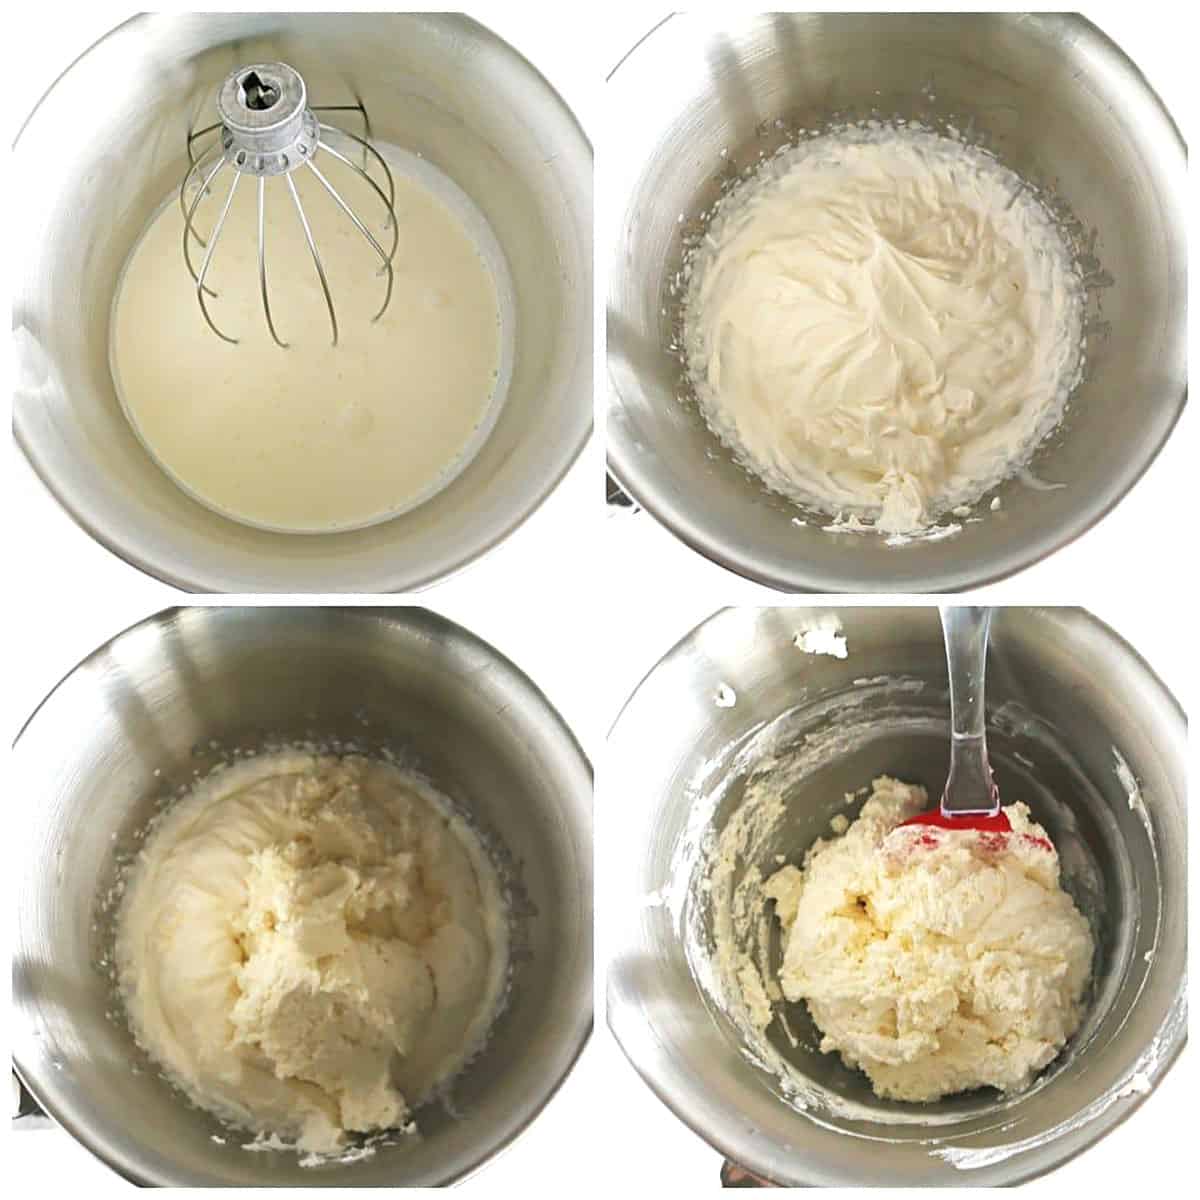 In a mixer bowl of a stand mixer, add heavy cream and beat on high for 2 minutes or until thick (do not overbeat).